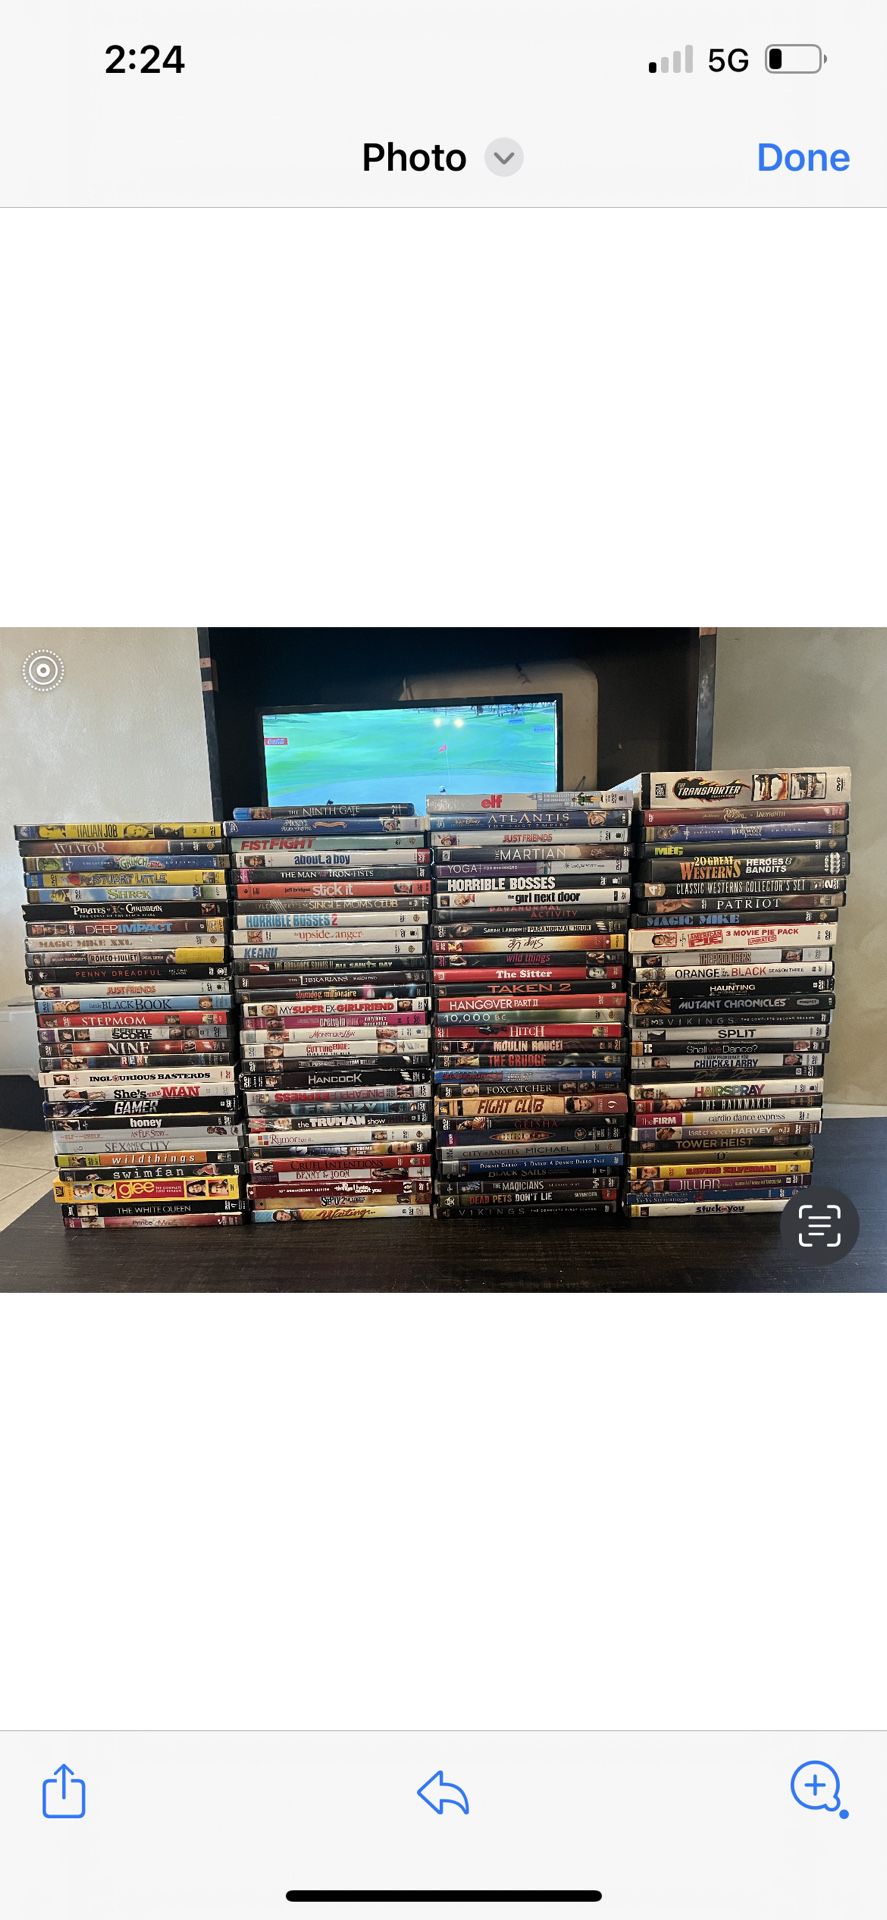 DVD Lot- Some New Some Used Take All 